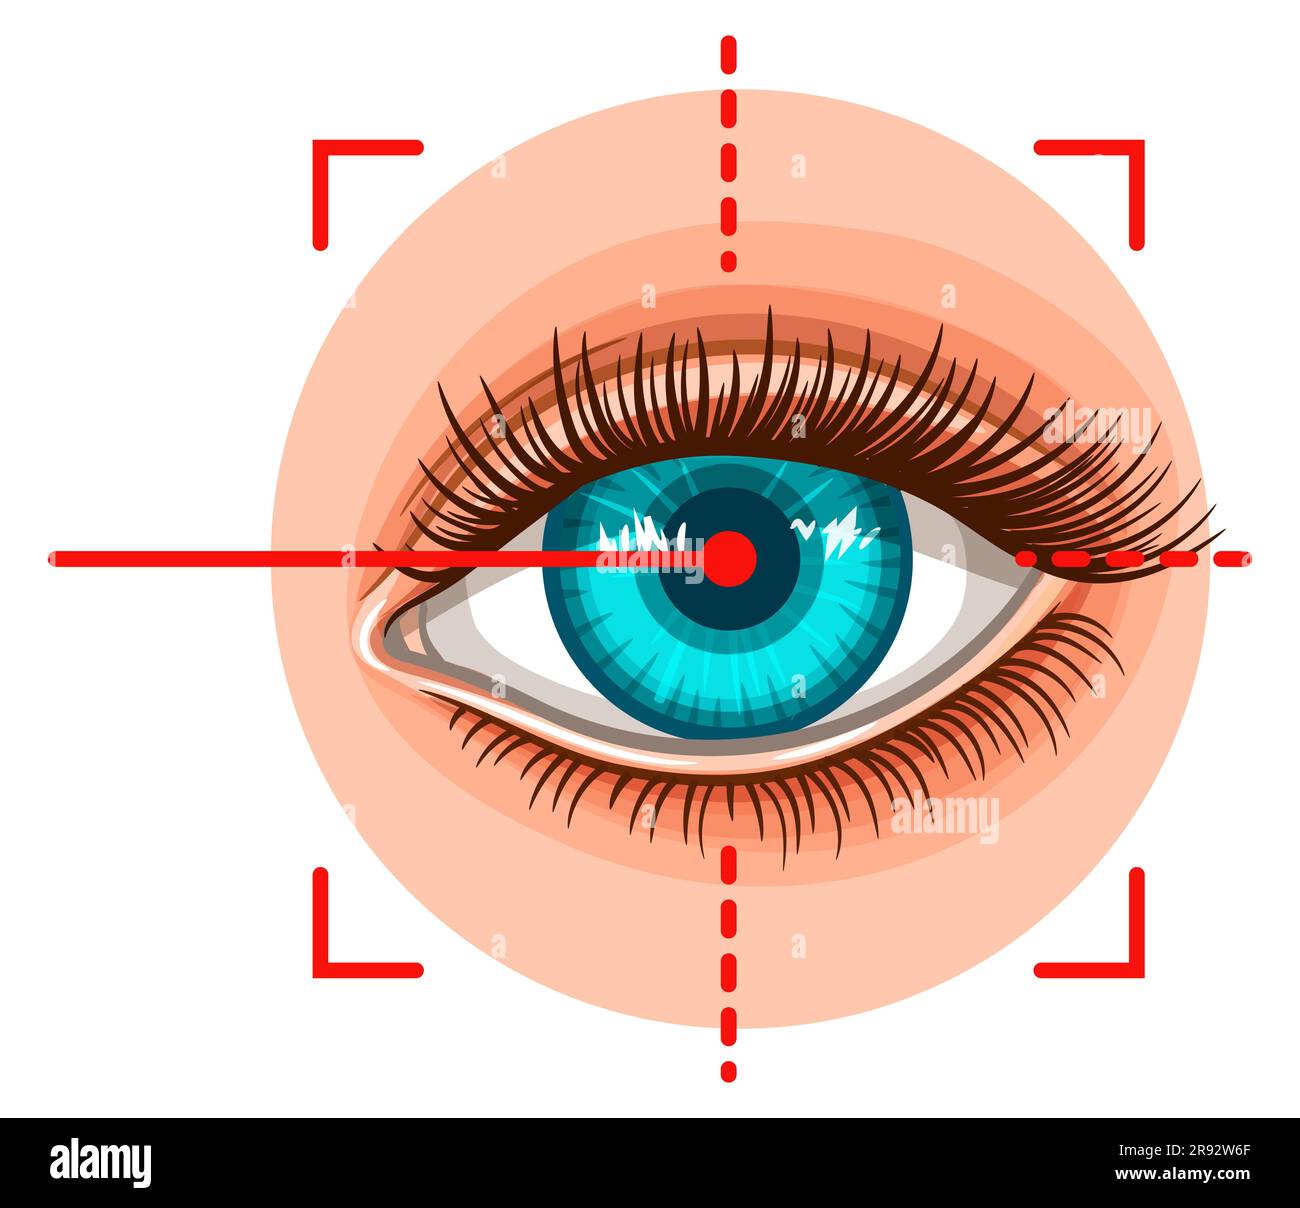 Laser eye surgery, vision correction medical procedure, sight focus, ophthalmology treatment clinic icon. Eyesight diagnostic test. Retina scan vector Stock Vector